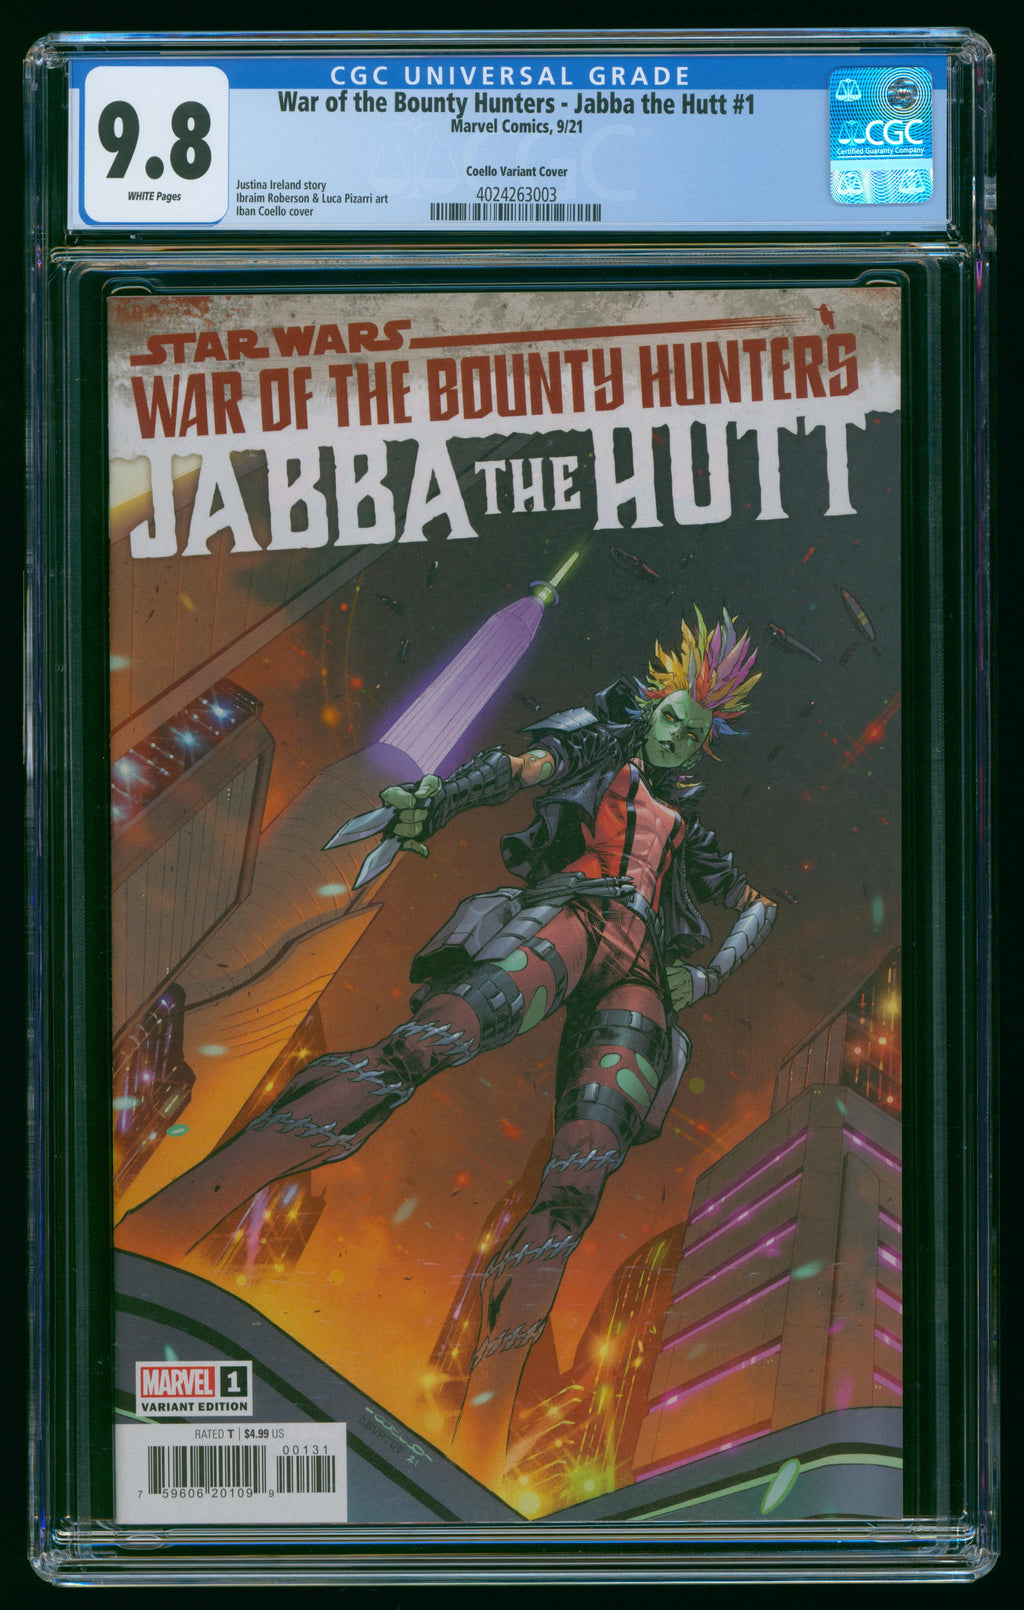 WAR OF THE BOUNTY HUNTERS - JABBA THE HUTT #1 RETAILER INCENTIVE VARIANT CGC 9.8